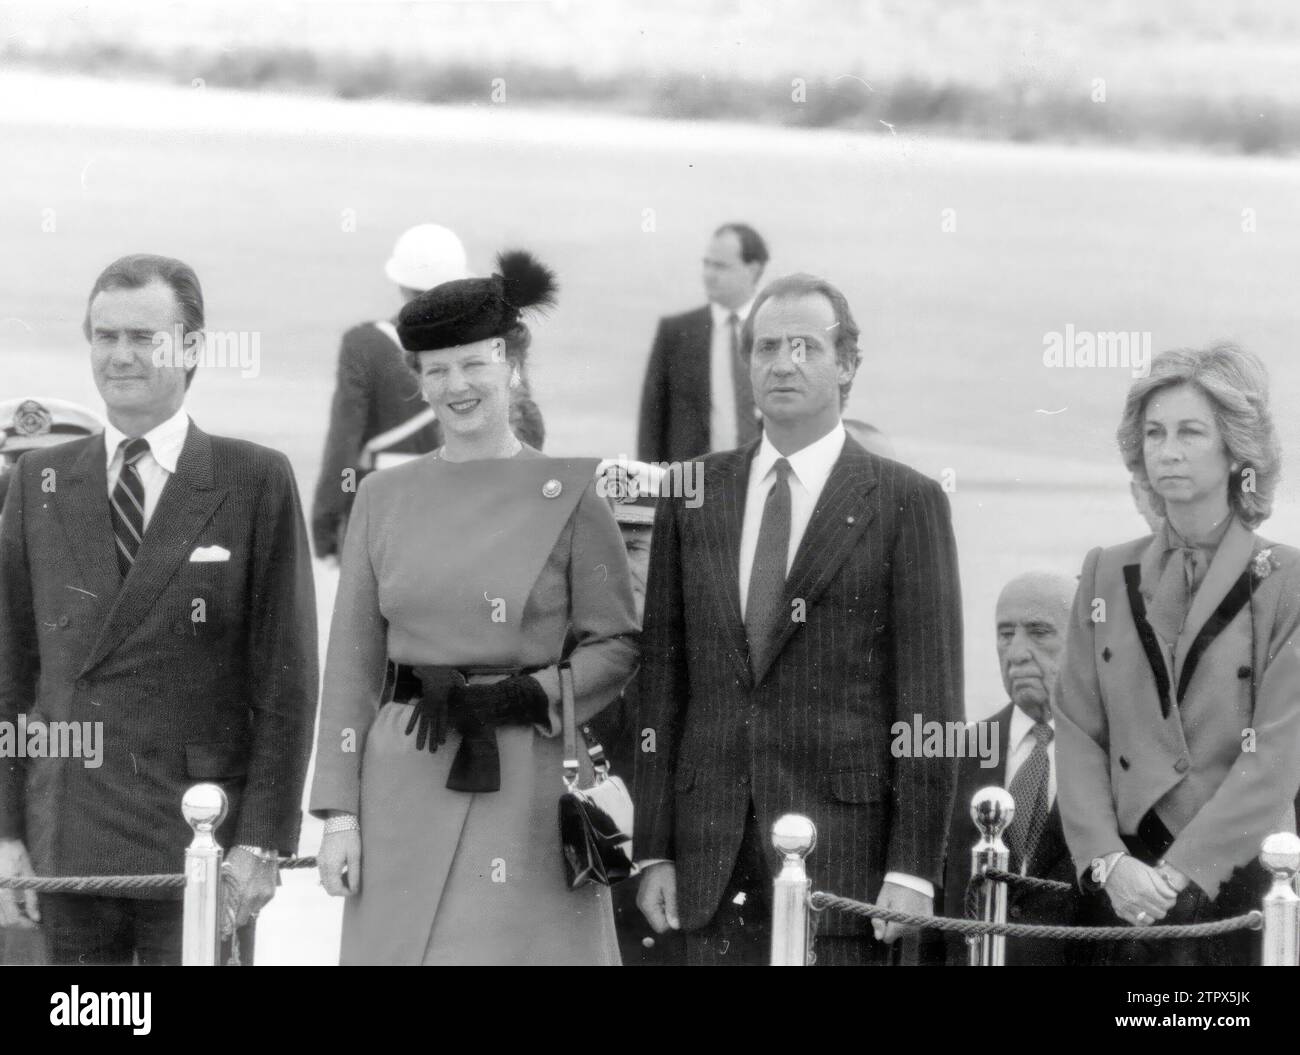 10/24/1983. The Kings of Denmark on a visit to Spain with the Kings. Credit: Album / Archivo ABC / Jaime Pato Stock Photo